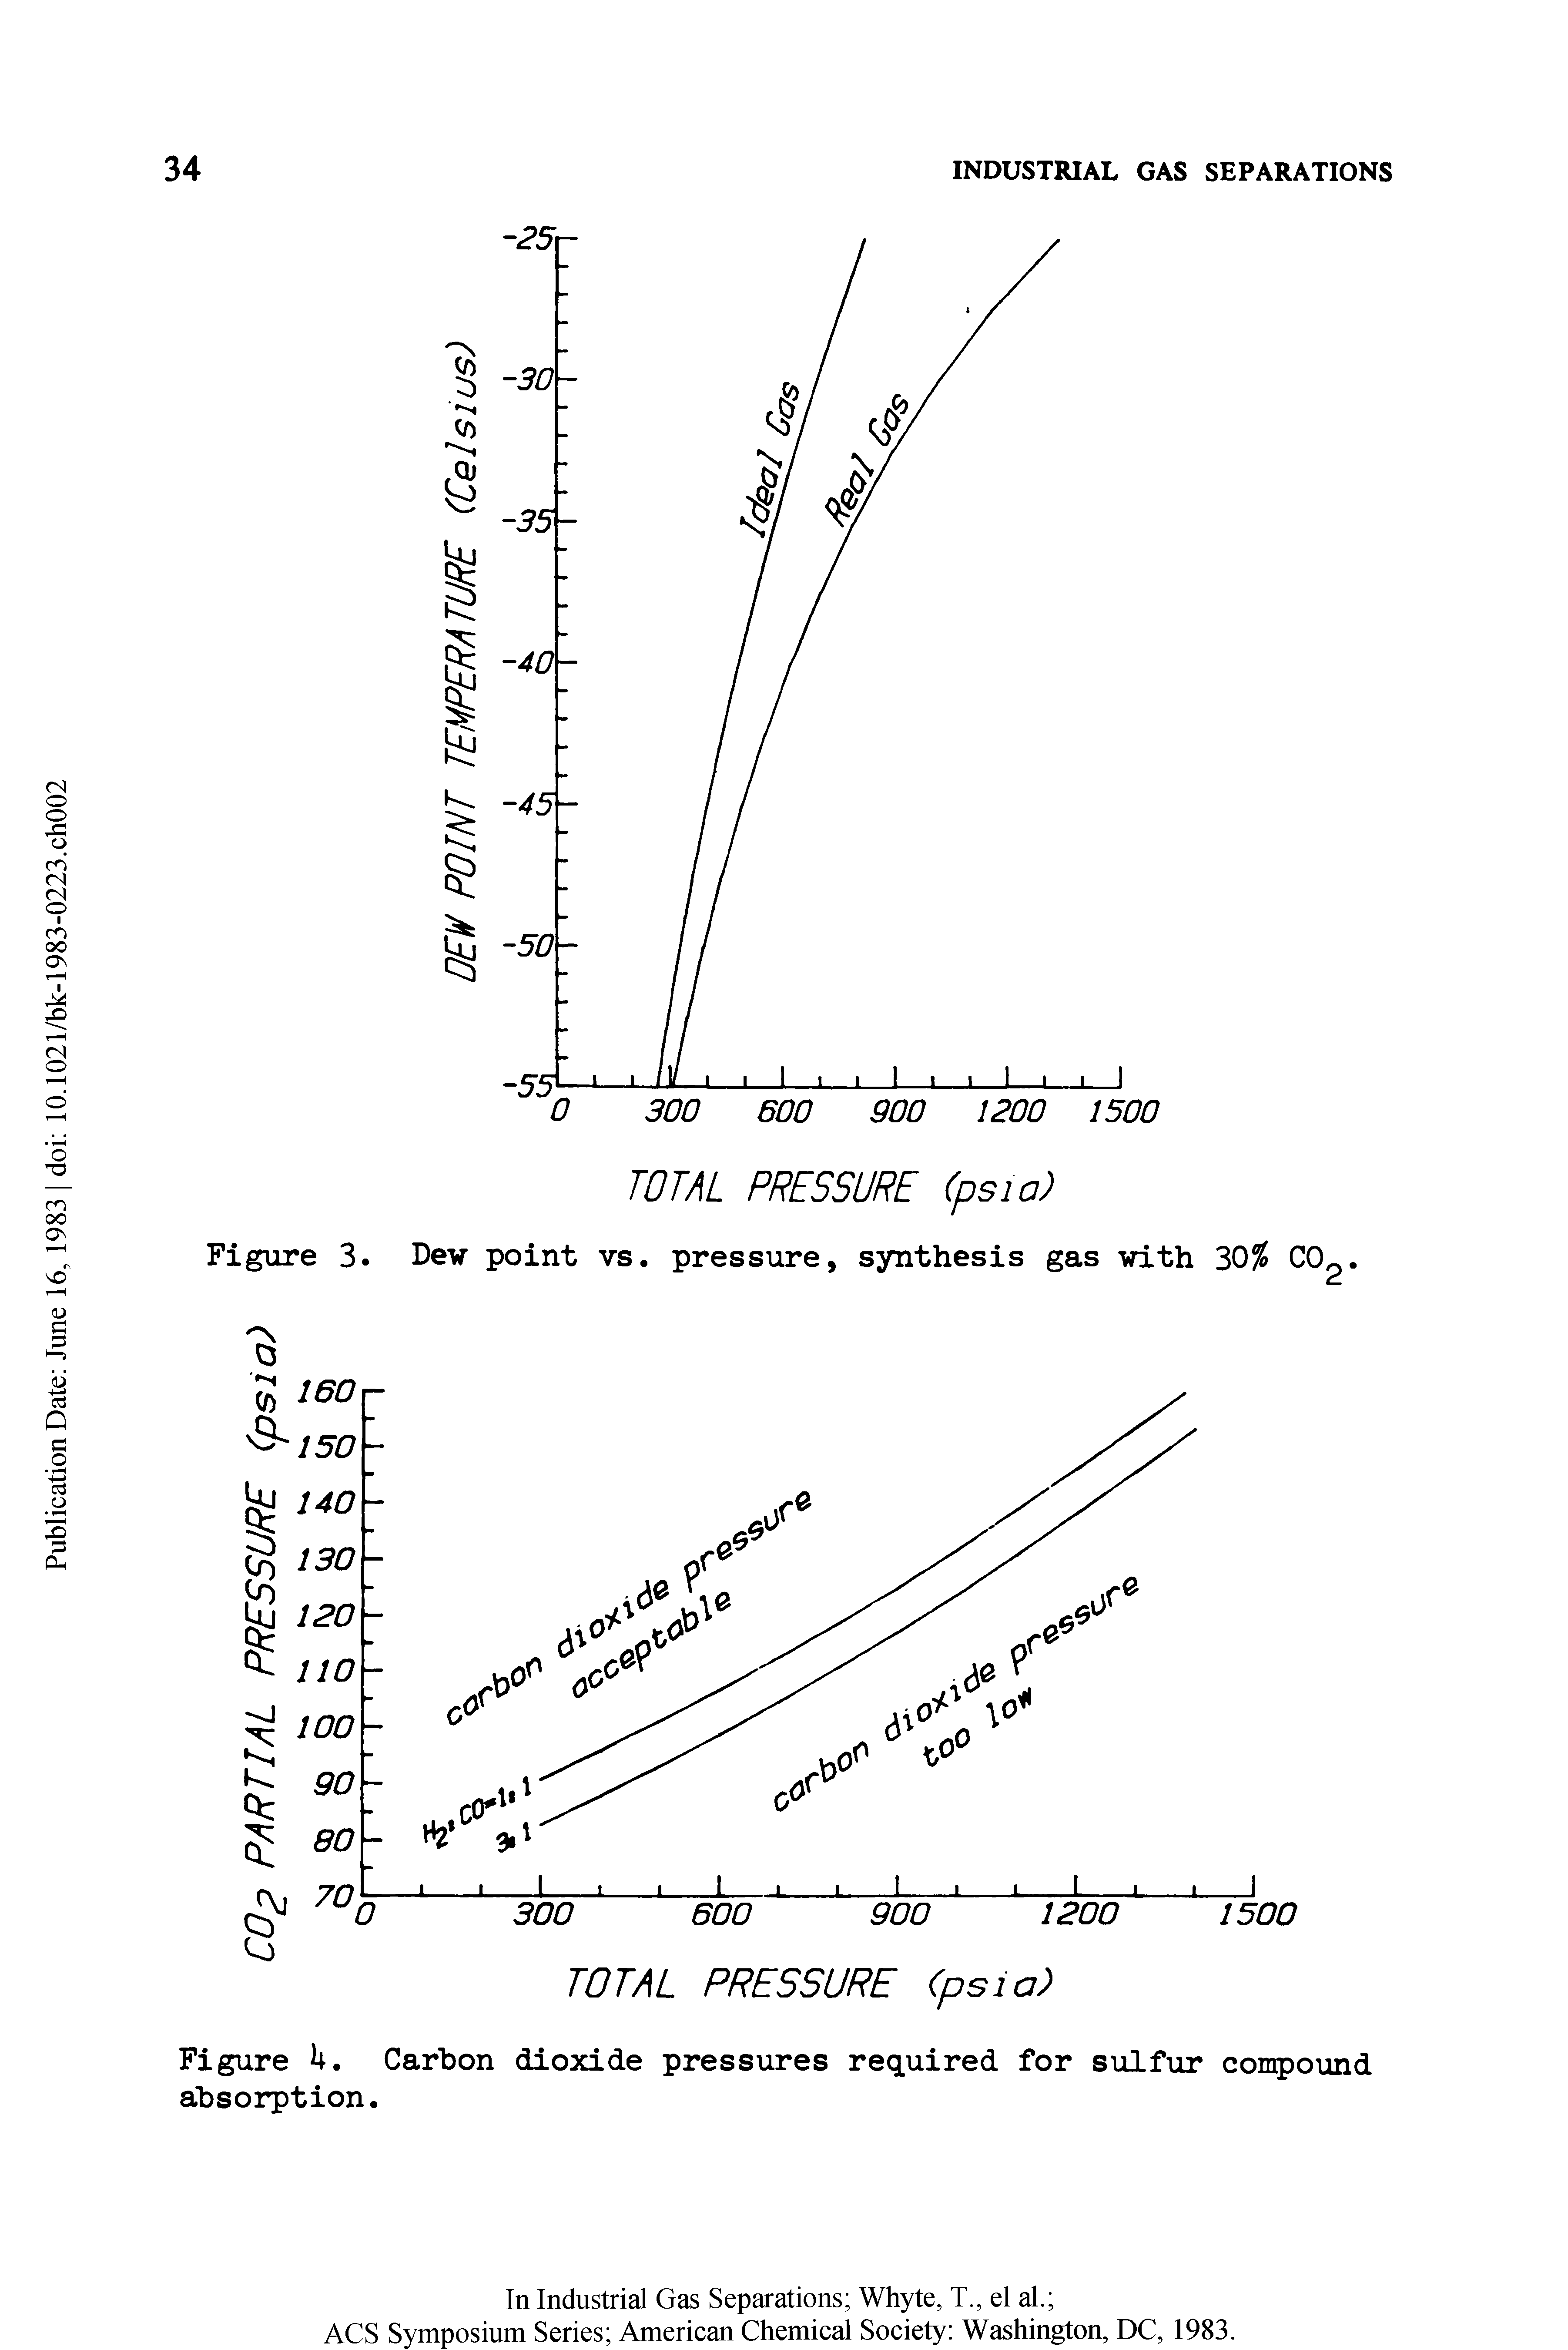 Figure H. Carbon dioxide pressures required for sulfur compound absorption.